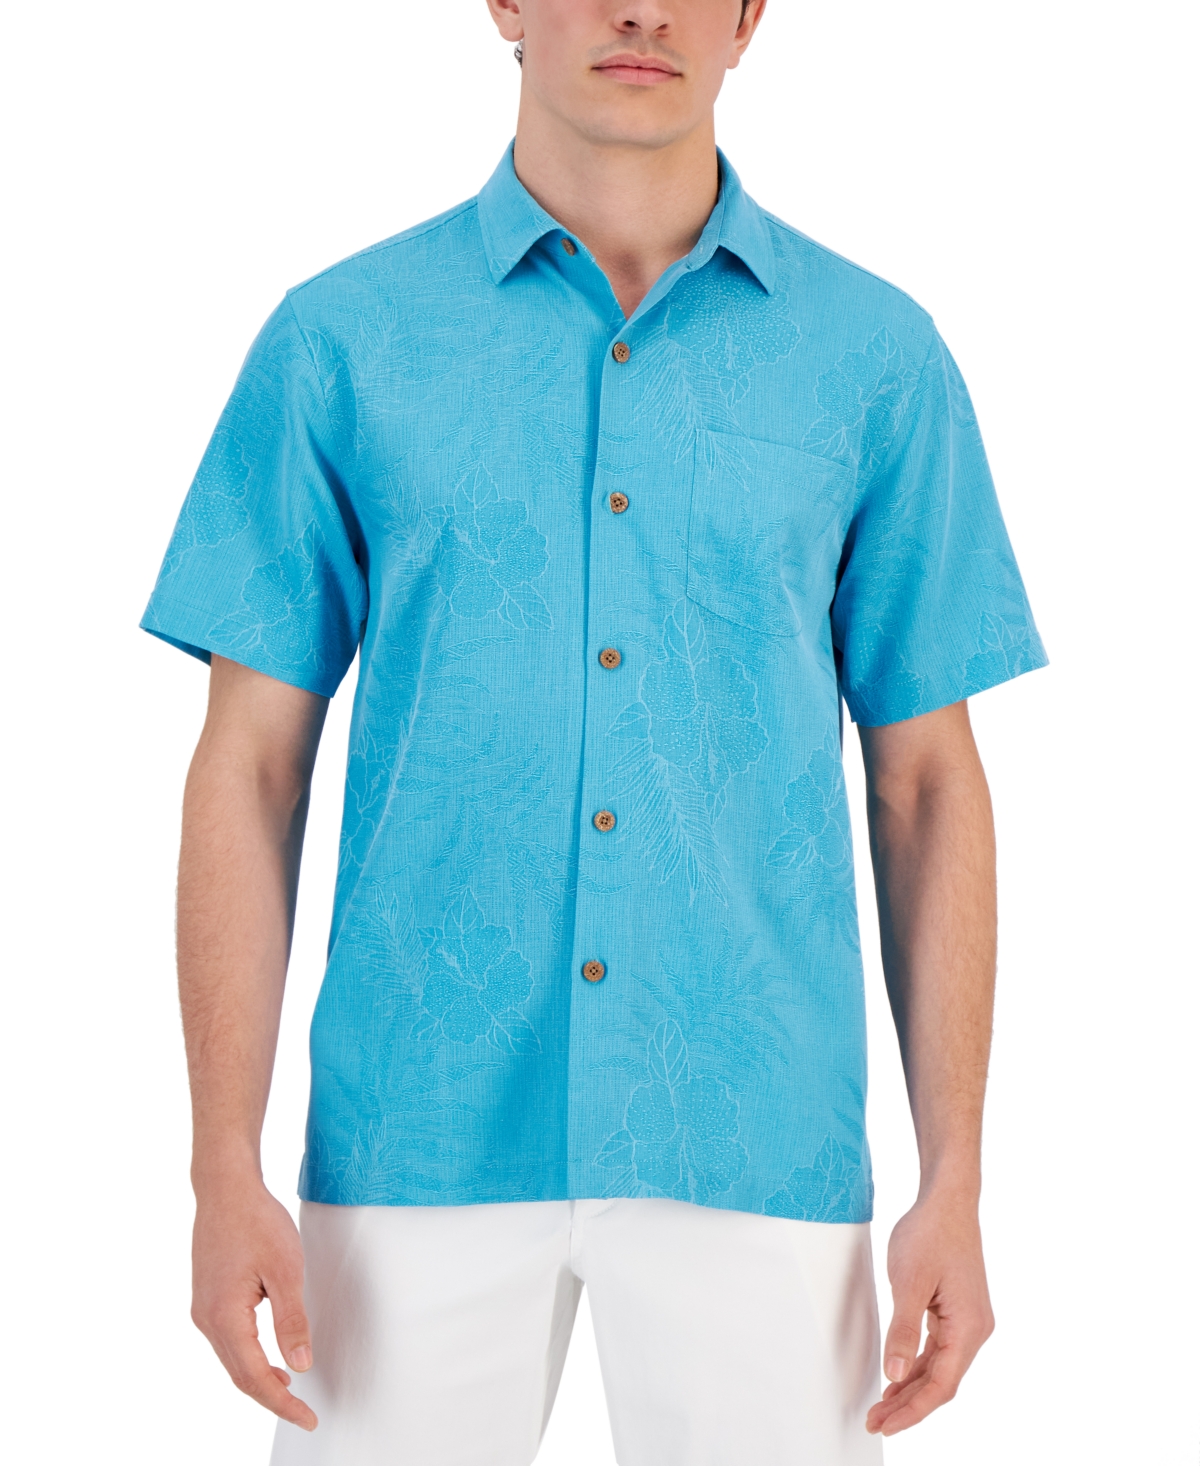 TOMMY BAHAMA MEN'S LUSH PALMS PRINTED SHIRT, CREATED FOR MACY'S